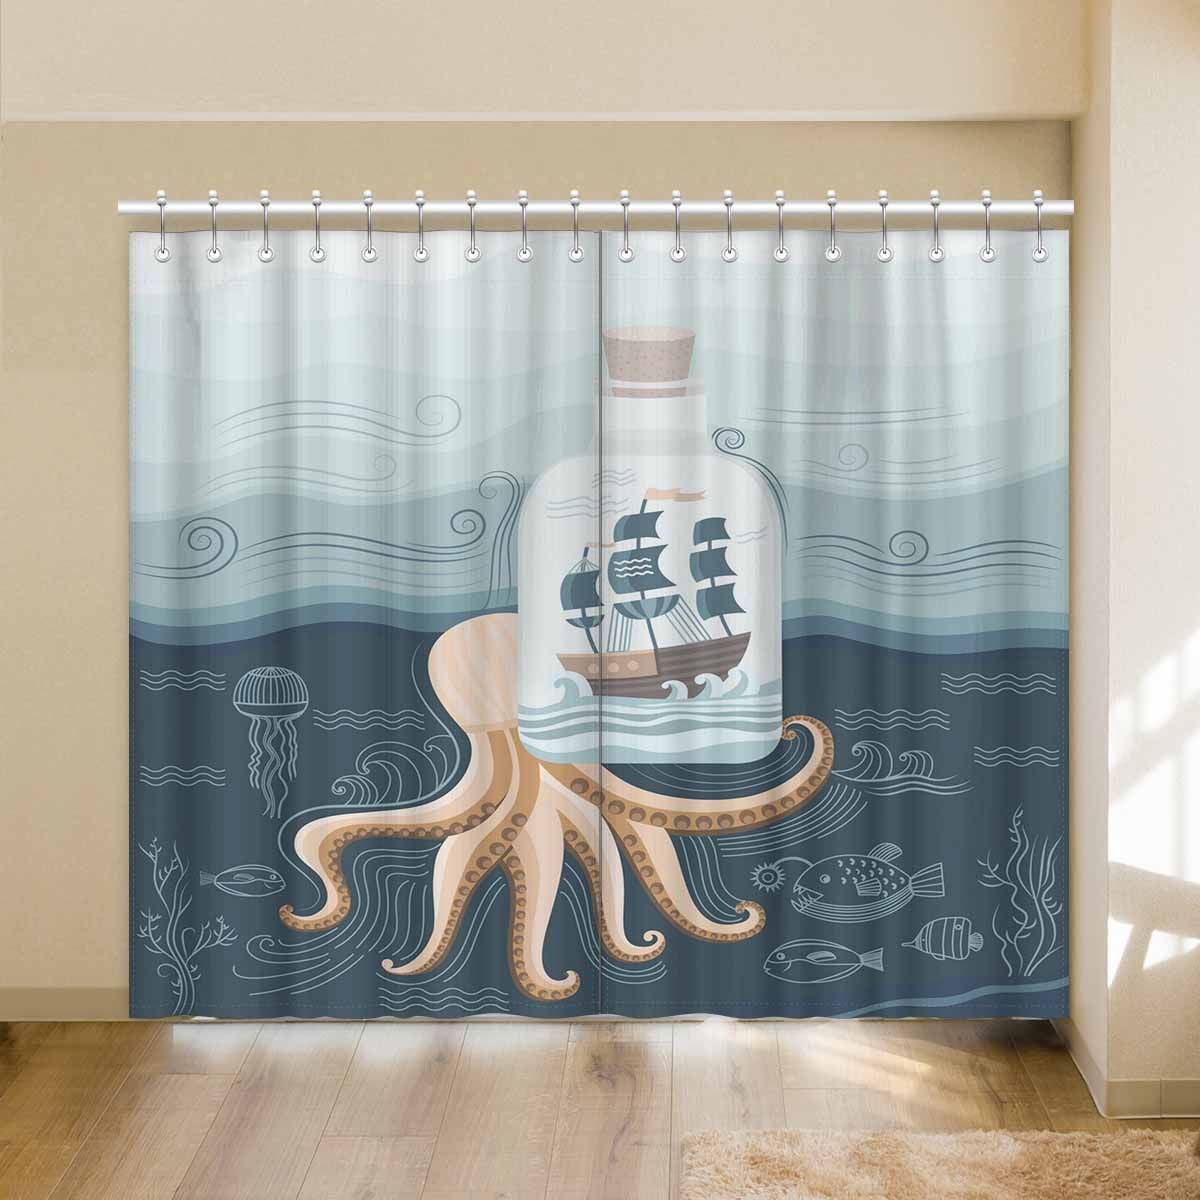 Jellyfish Octopus And Ship In Bottle Printed Window Curtain